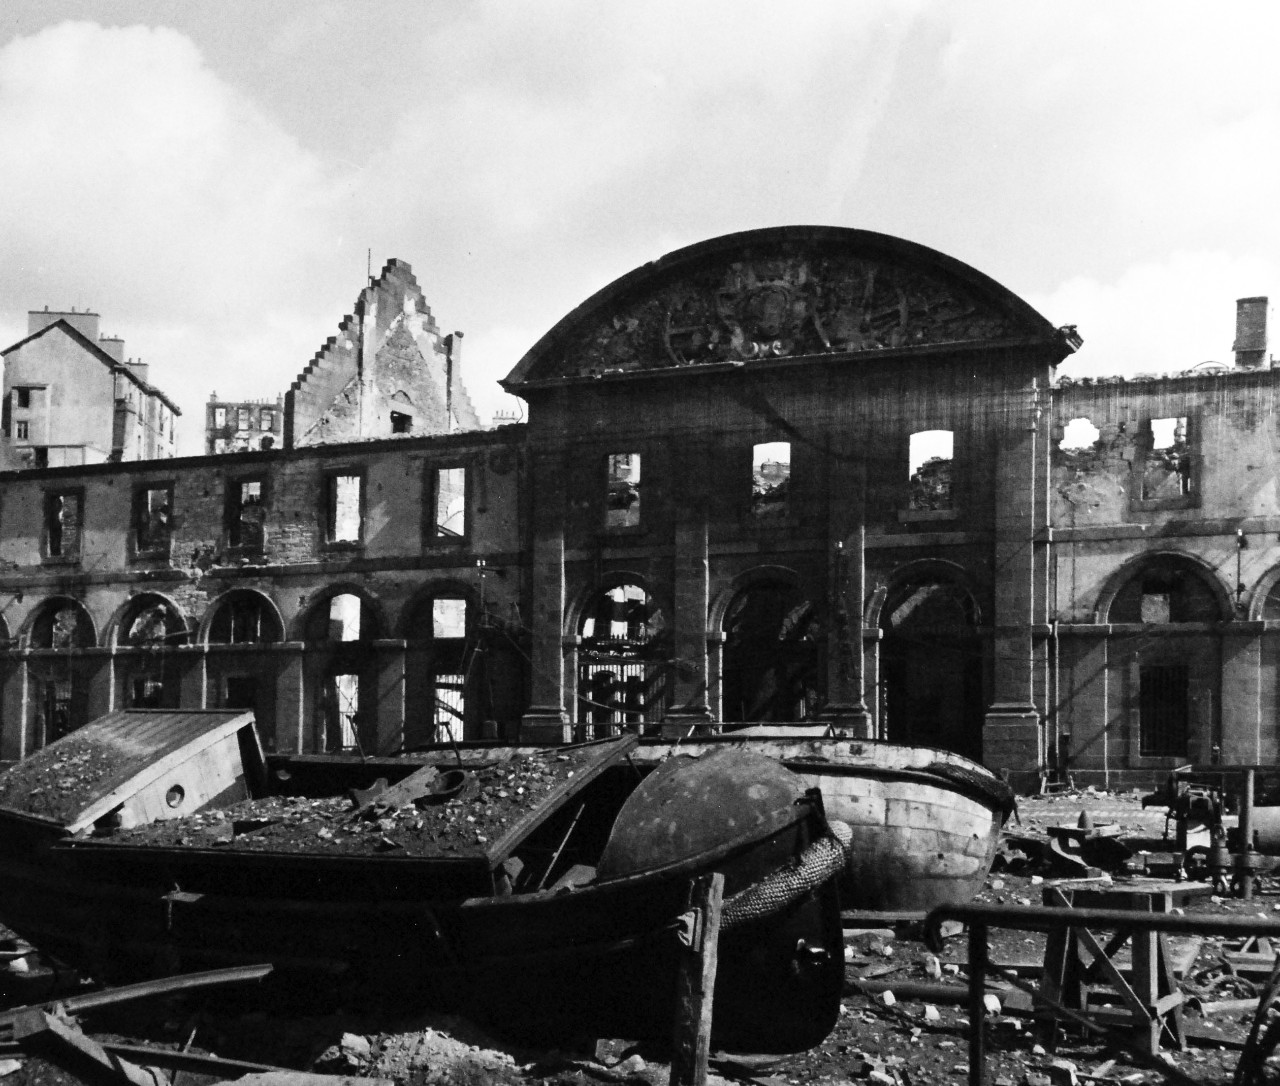 80-G-257462:  Invasion of Southern France, Brest, August-September 1944.   Allied Naval gunfire and serial bombing of Brest, France, during the battle for the liberation of the city, resulted in this devastation and wreckage.   Shown is the shell of the old French arsenal, around it are wrecked boats and other debris, 27 September 1944.  Official U.S. Navy Photograph, now in the collections of the National Archives.   (2014/10/28).